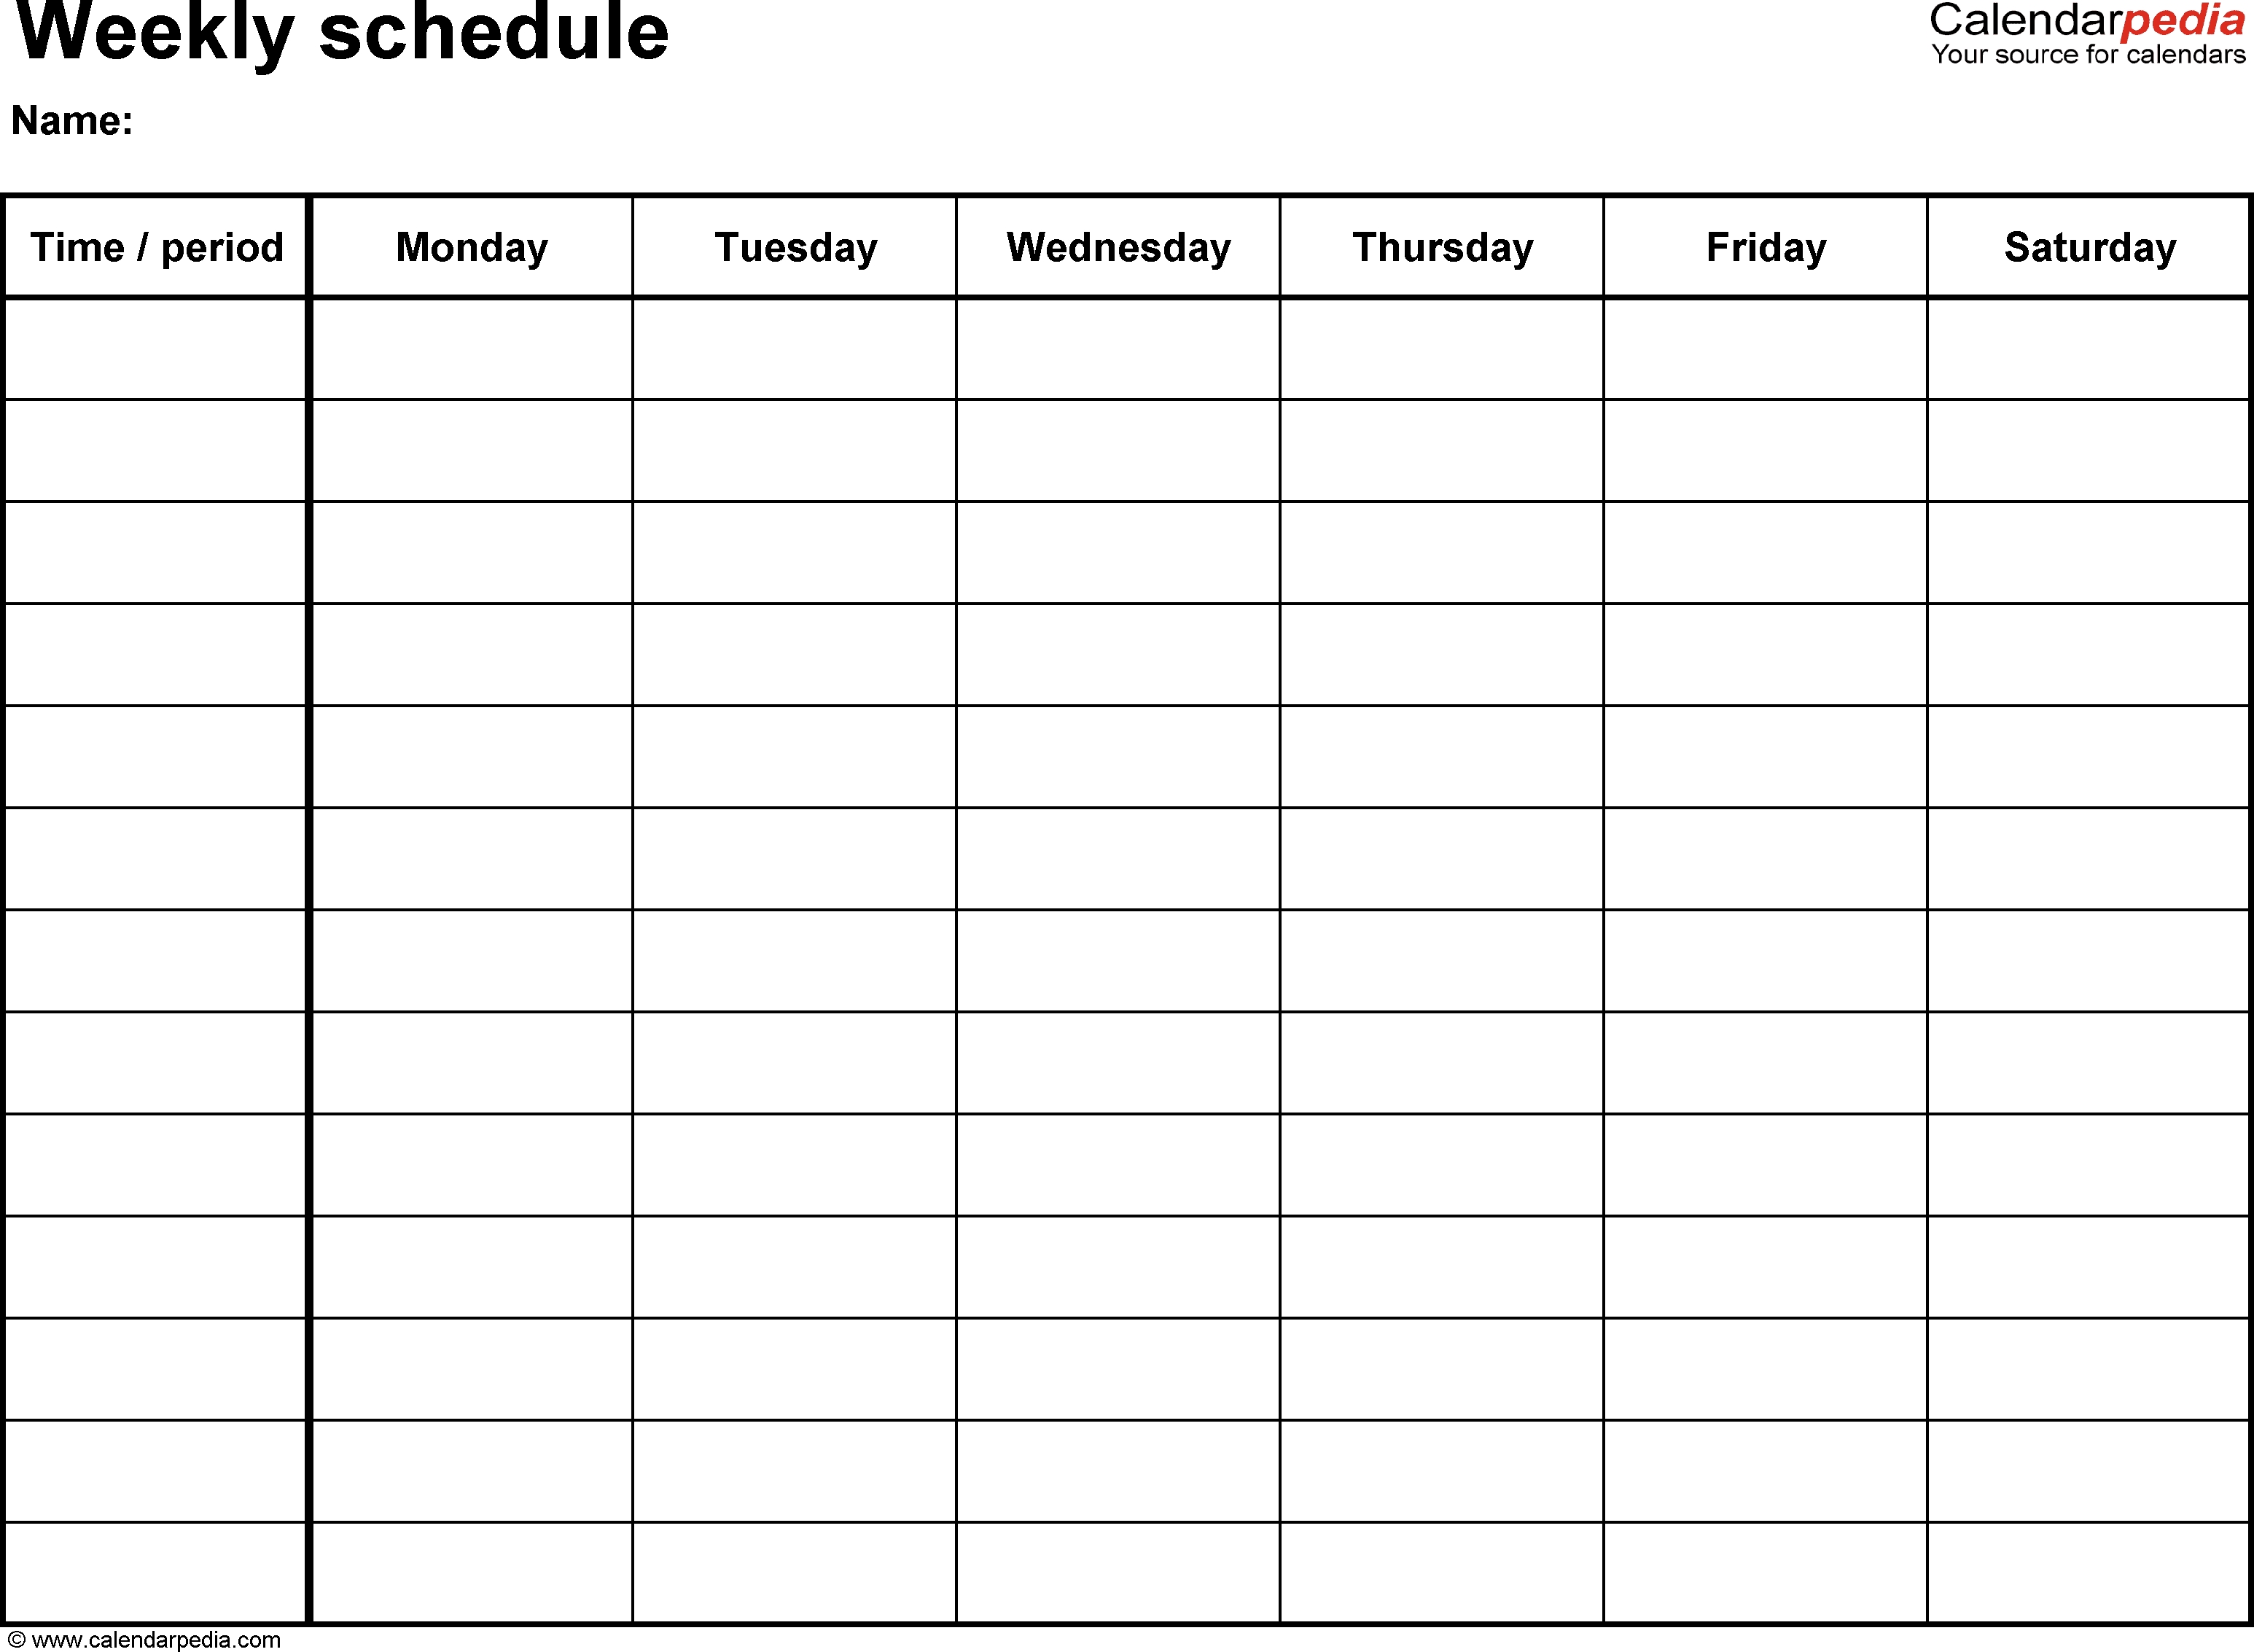 Free Weekly Schedule Templates For Word - 18 Templates-Monday Wednesday Friday Schedule Template